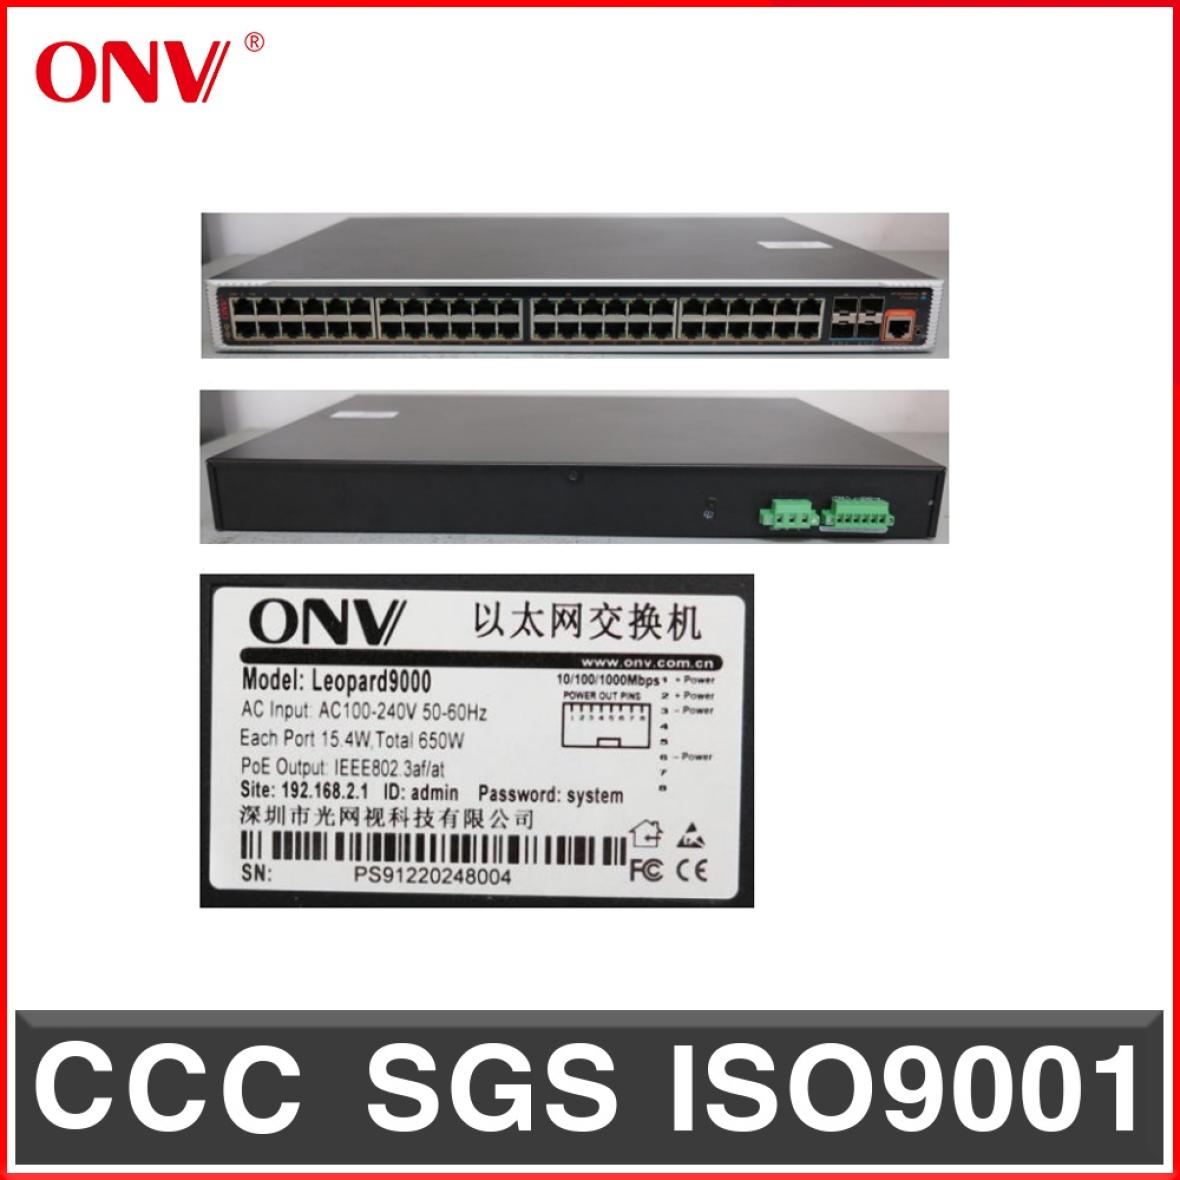 China Telecommunication Labs (CTTL) certification test authorizes ONV Ethernet switch certificate!